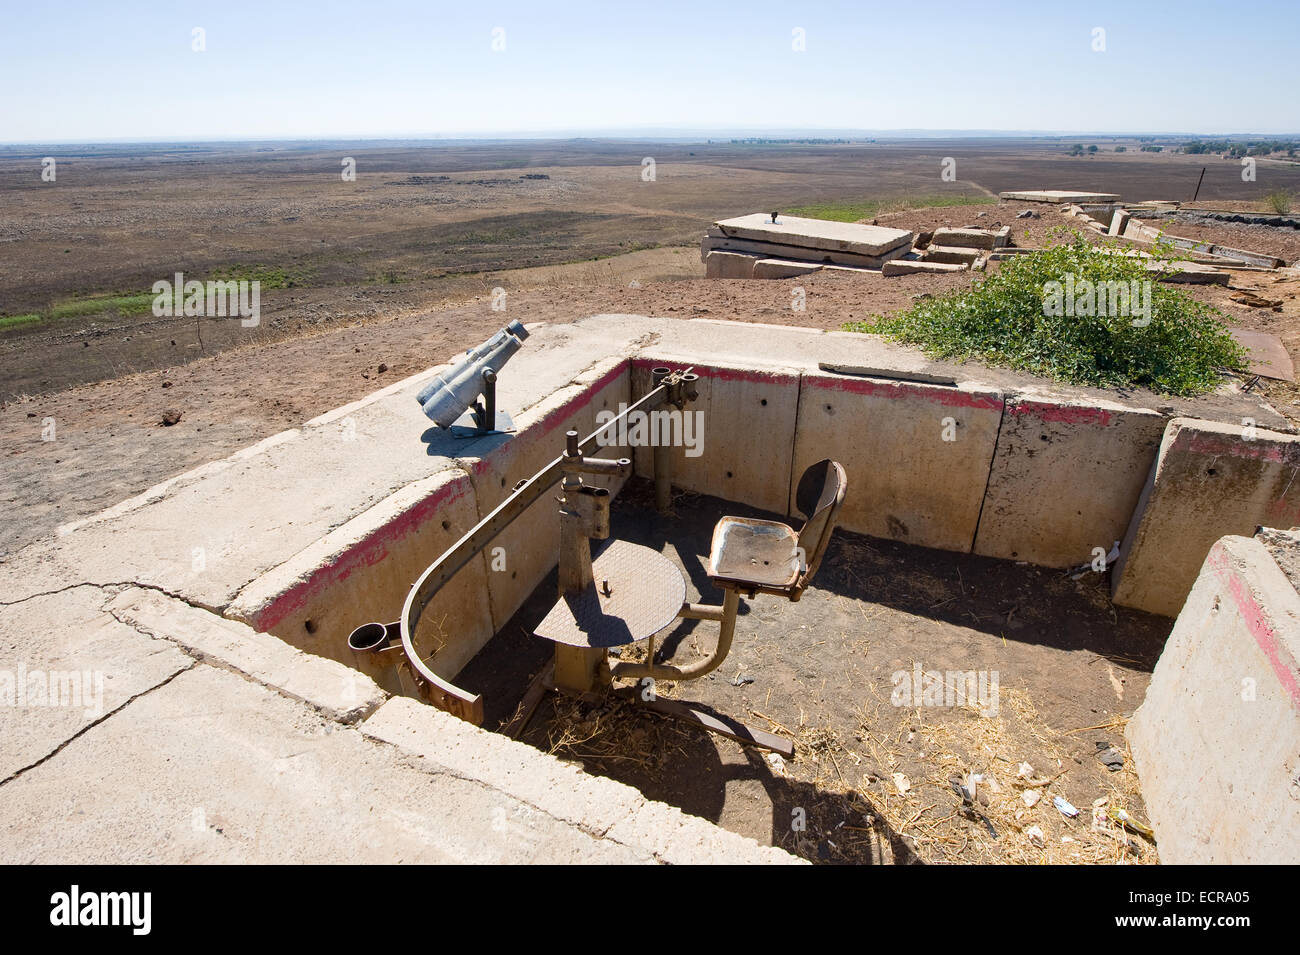 Remains of the yom kippur war on hill 'tel e-saki' close to the Syrian border on the Golan Heights Stock Photo